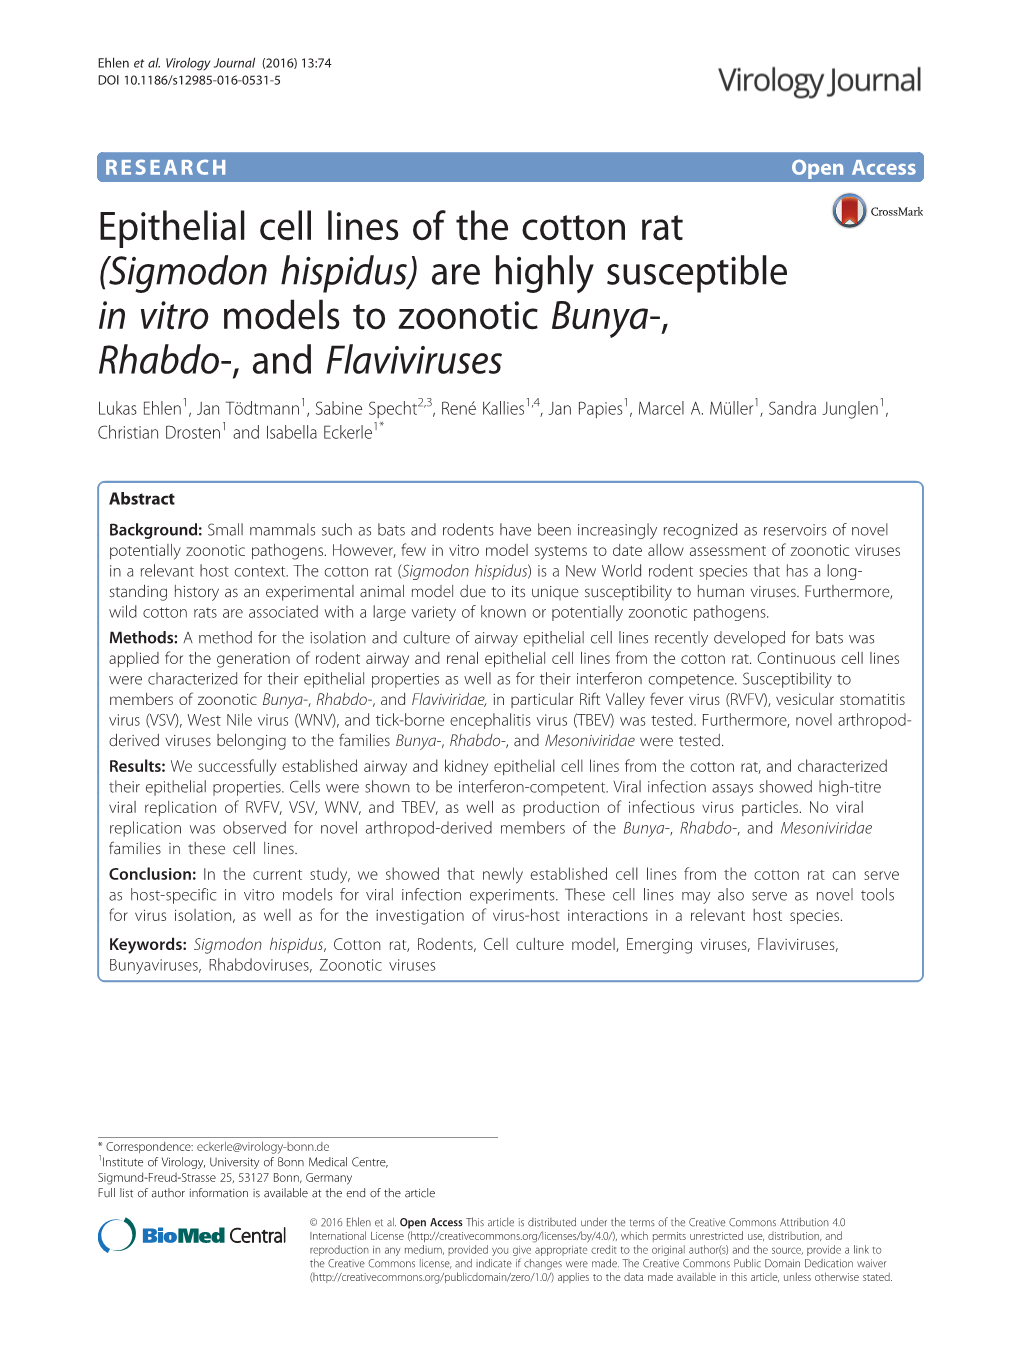 Epithelial Cell Lines of the Cotton Rat (Sigmodon Hispidus) Are Highly